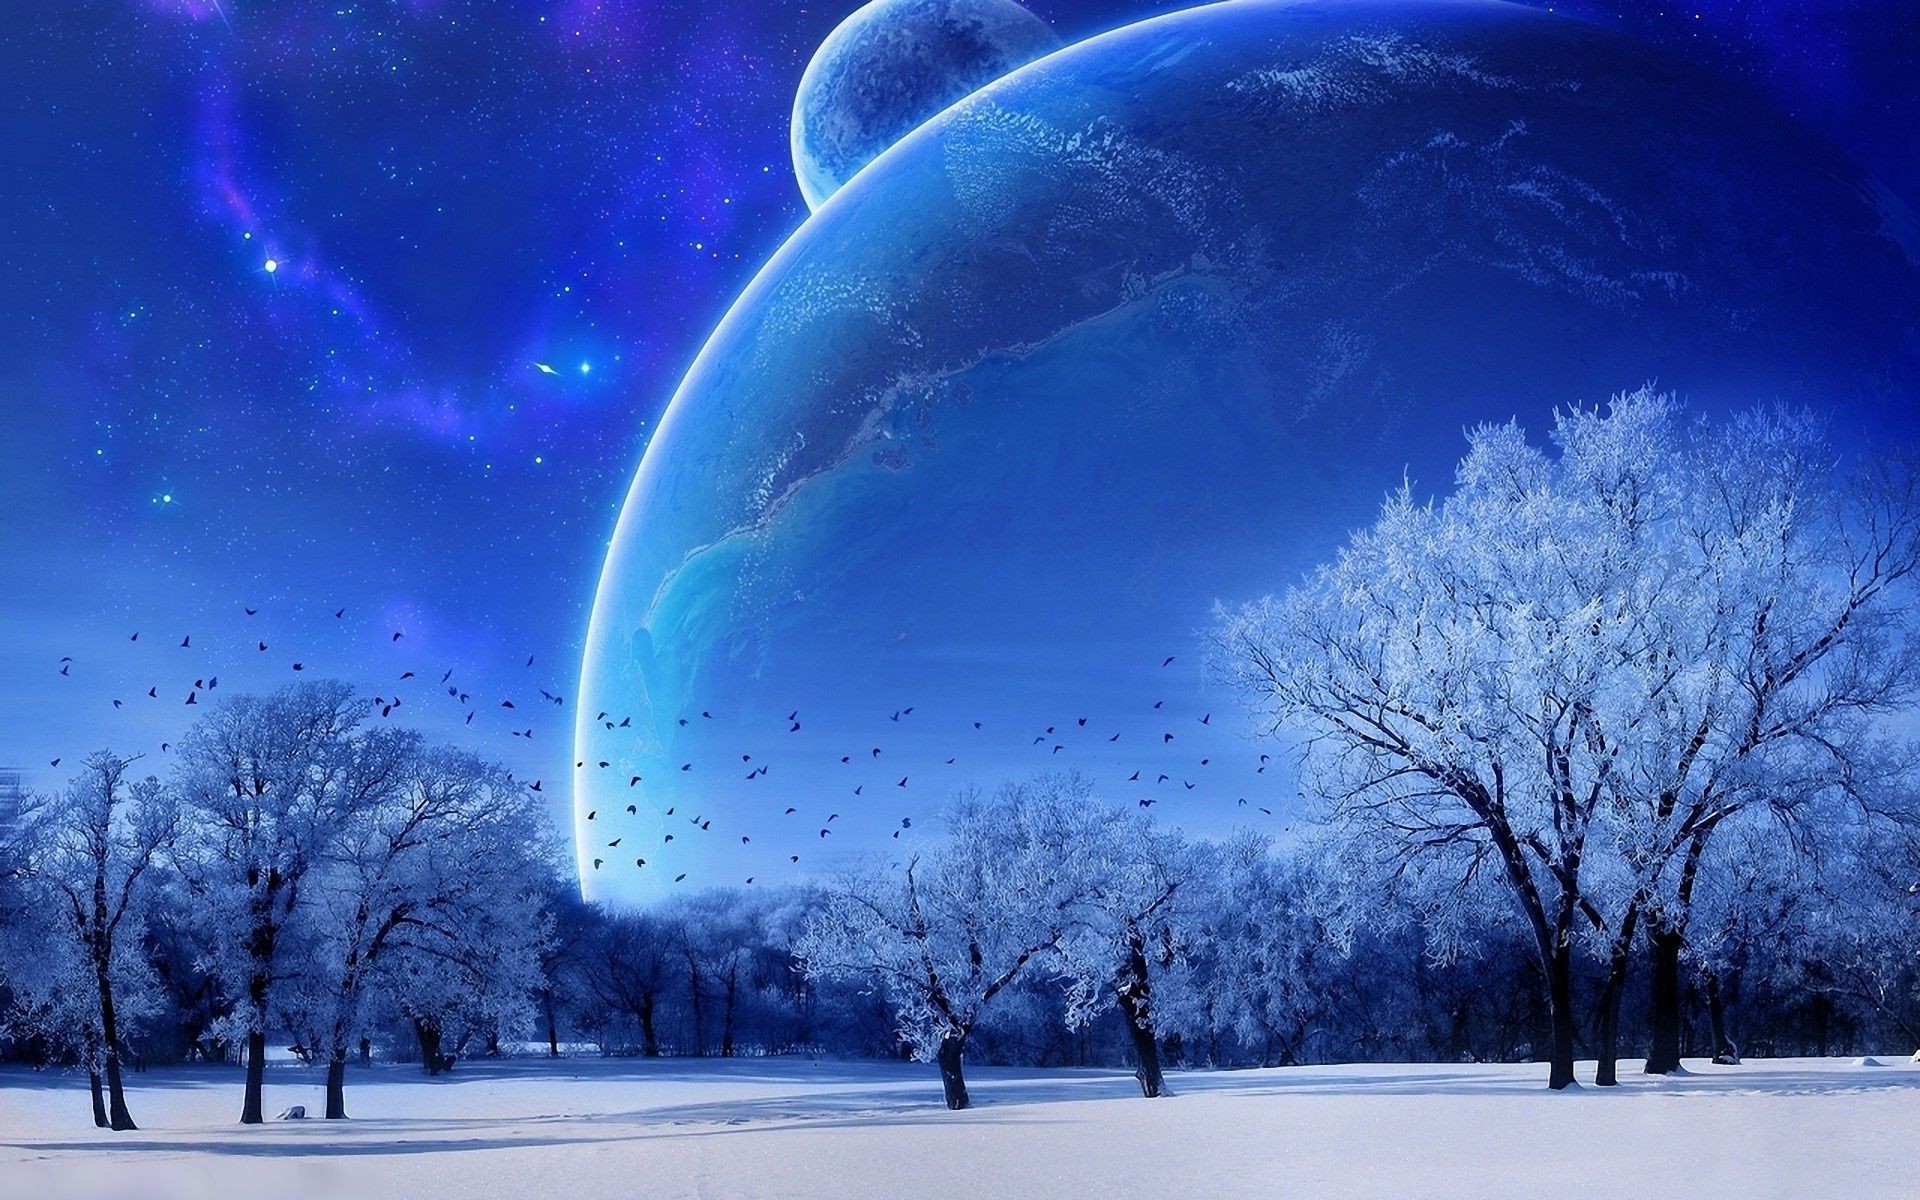 space winter snow weather landscape cold nature tree light sky bright